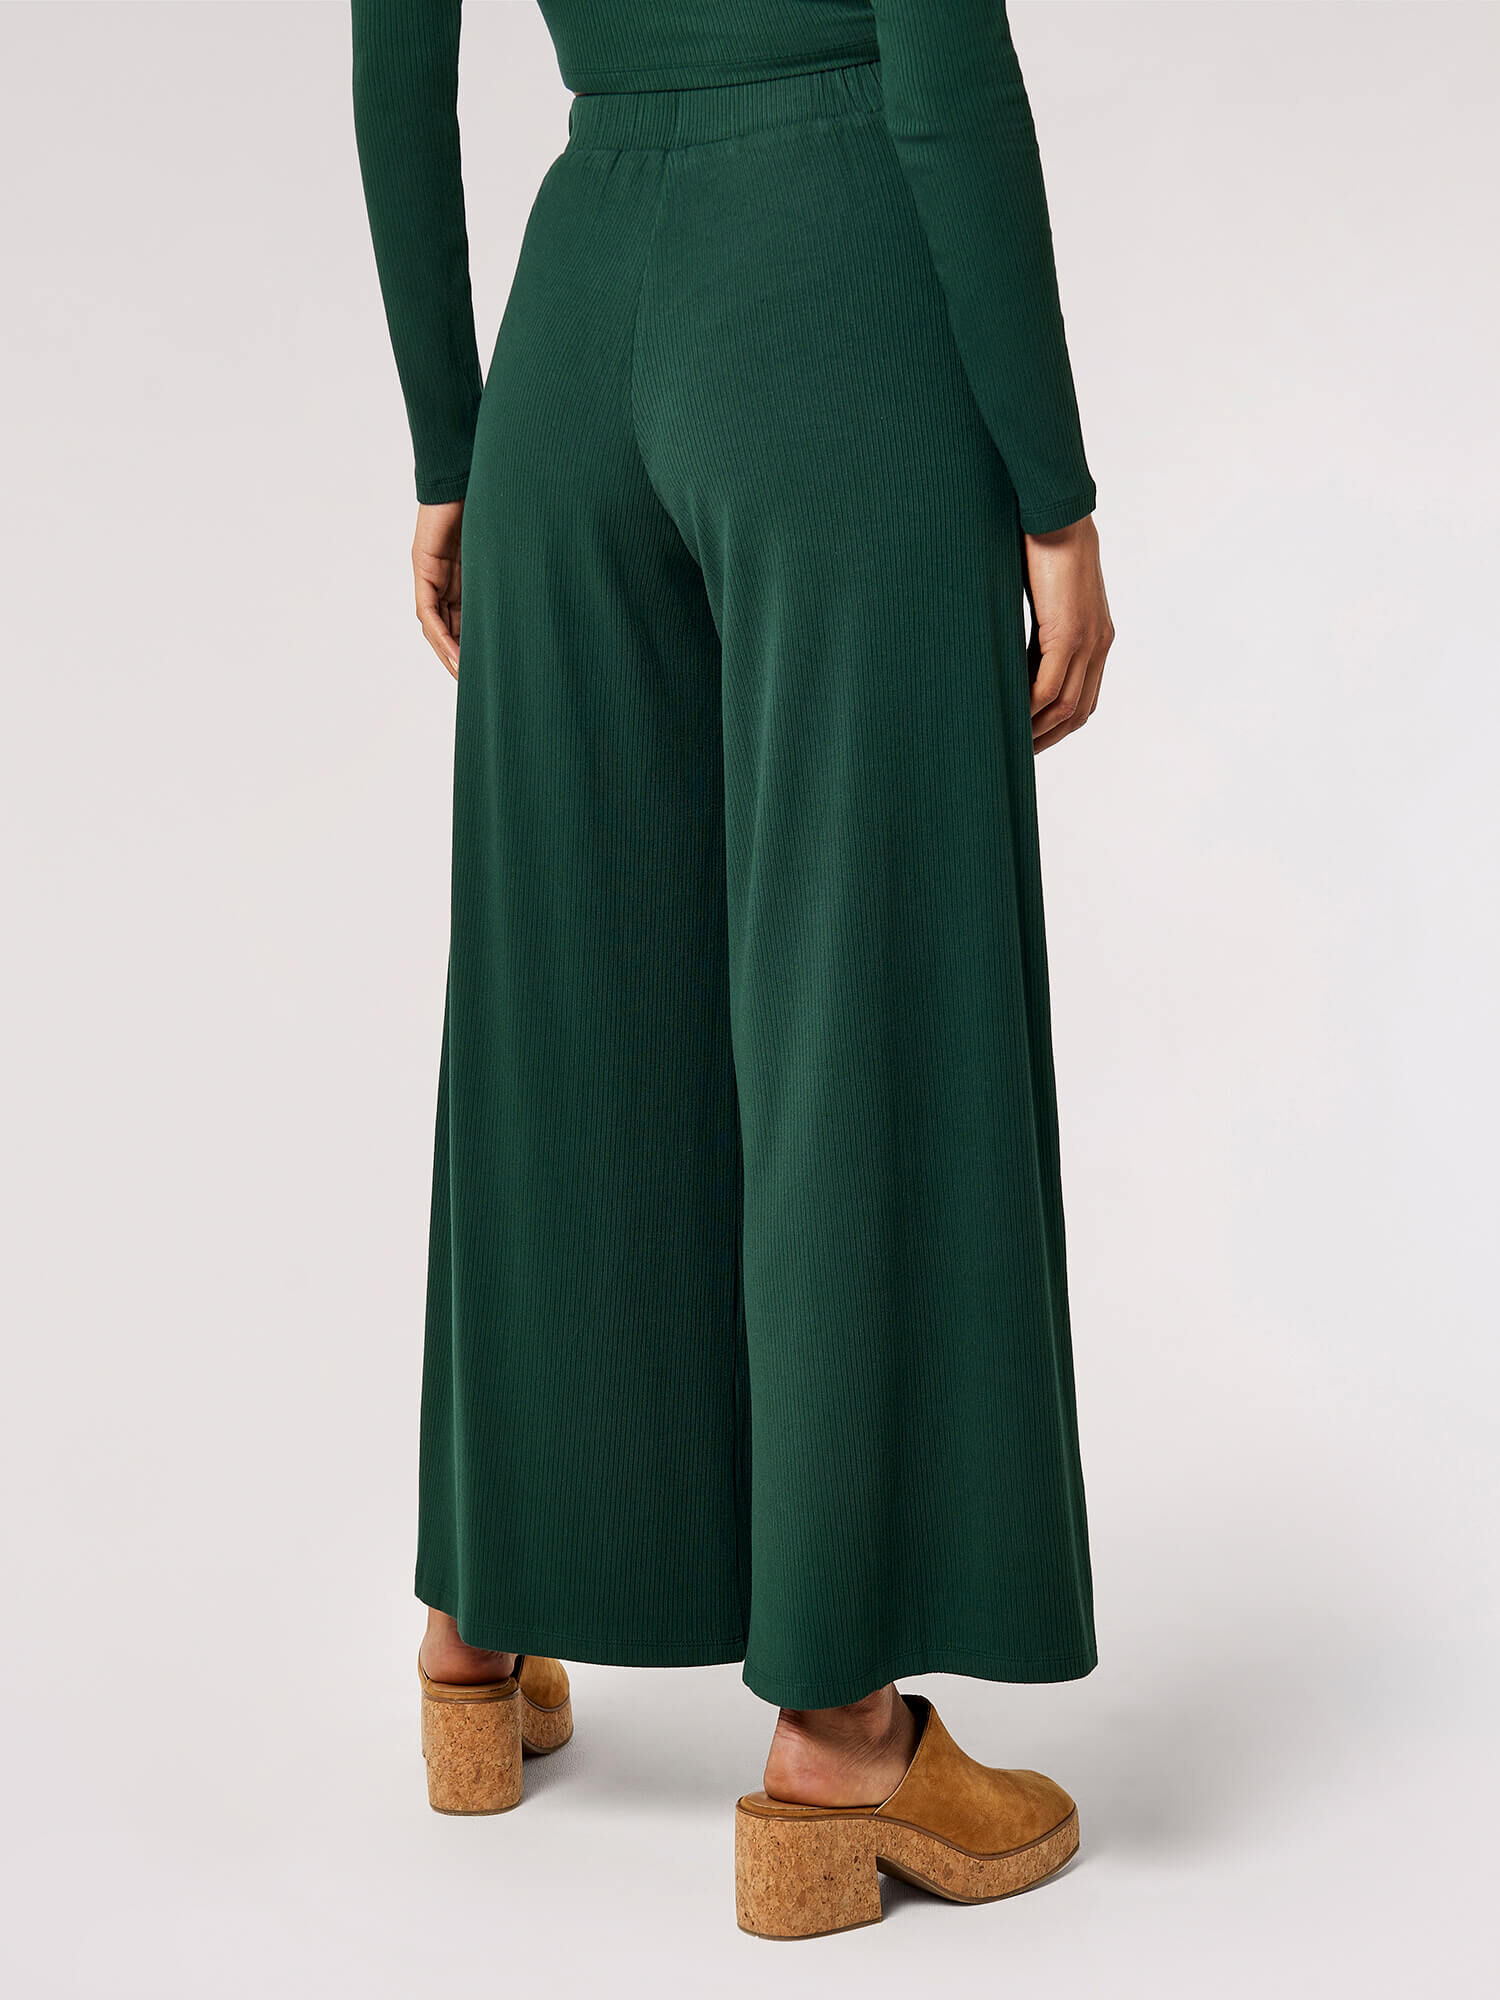 Self-Tie Waist Knit Wide-Leg Pants in Tan - Retro, Indie and Unique Fashion